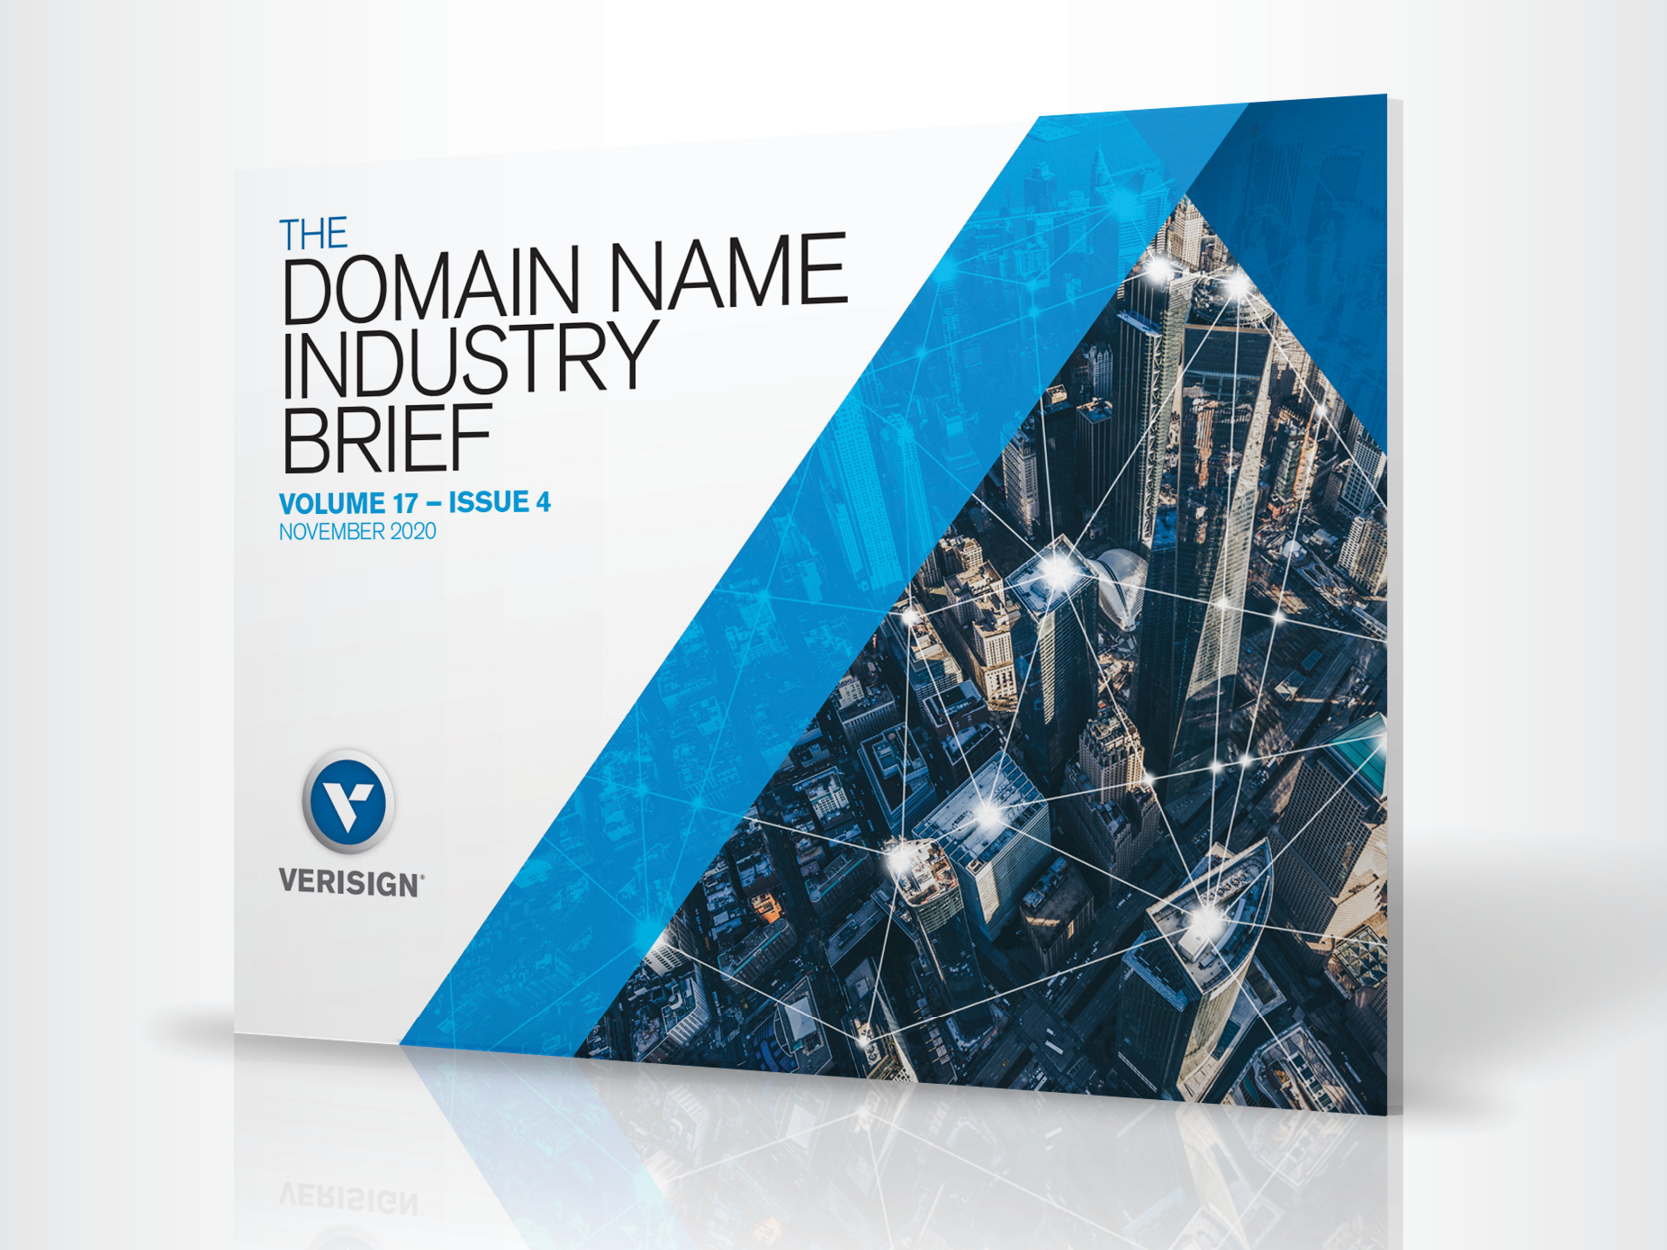 Internet grows to 370.7 million domain name registrations at the end of the third quarter of 2020.